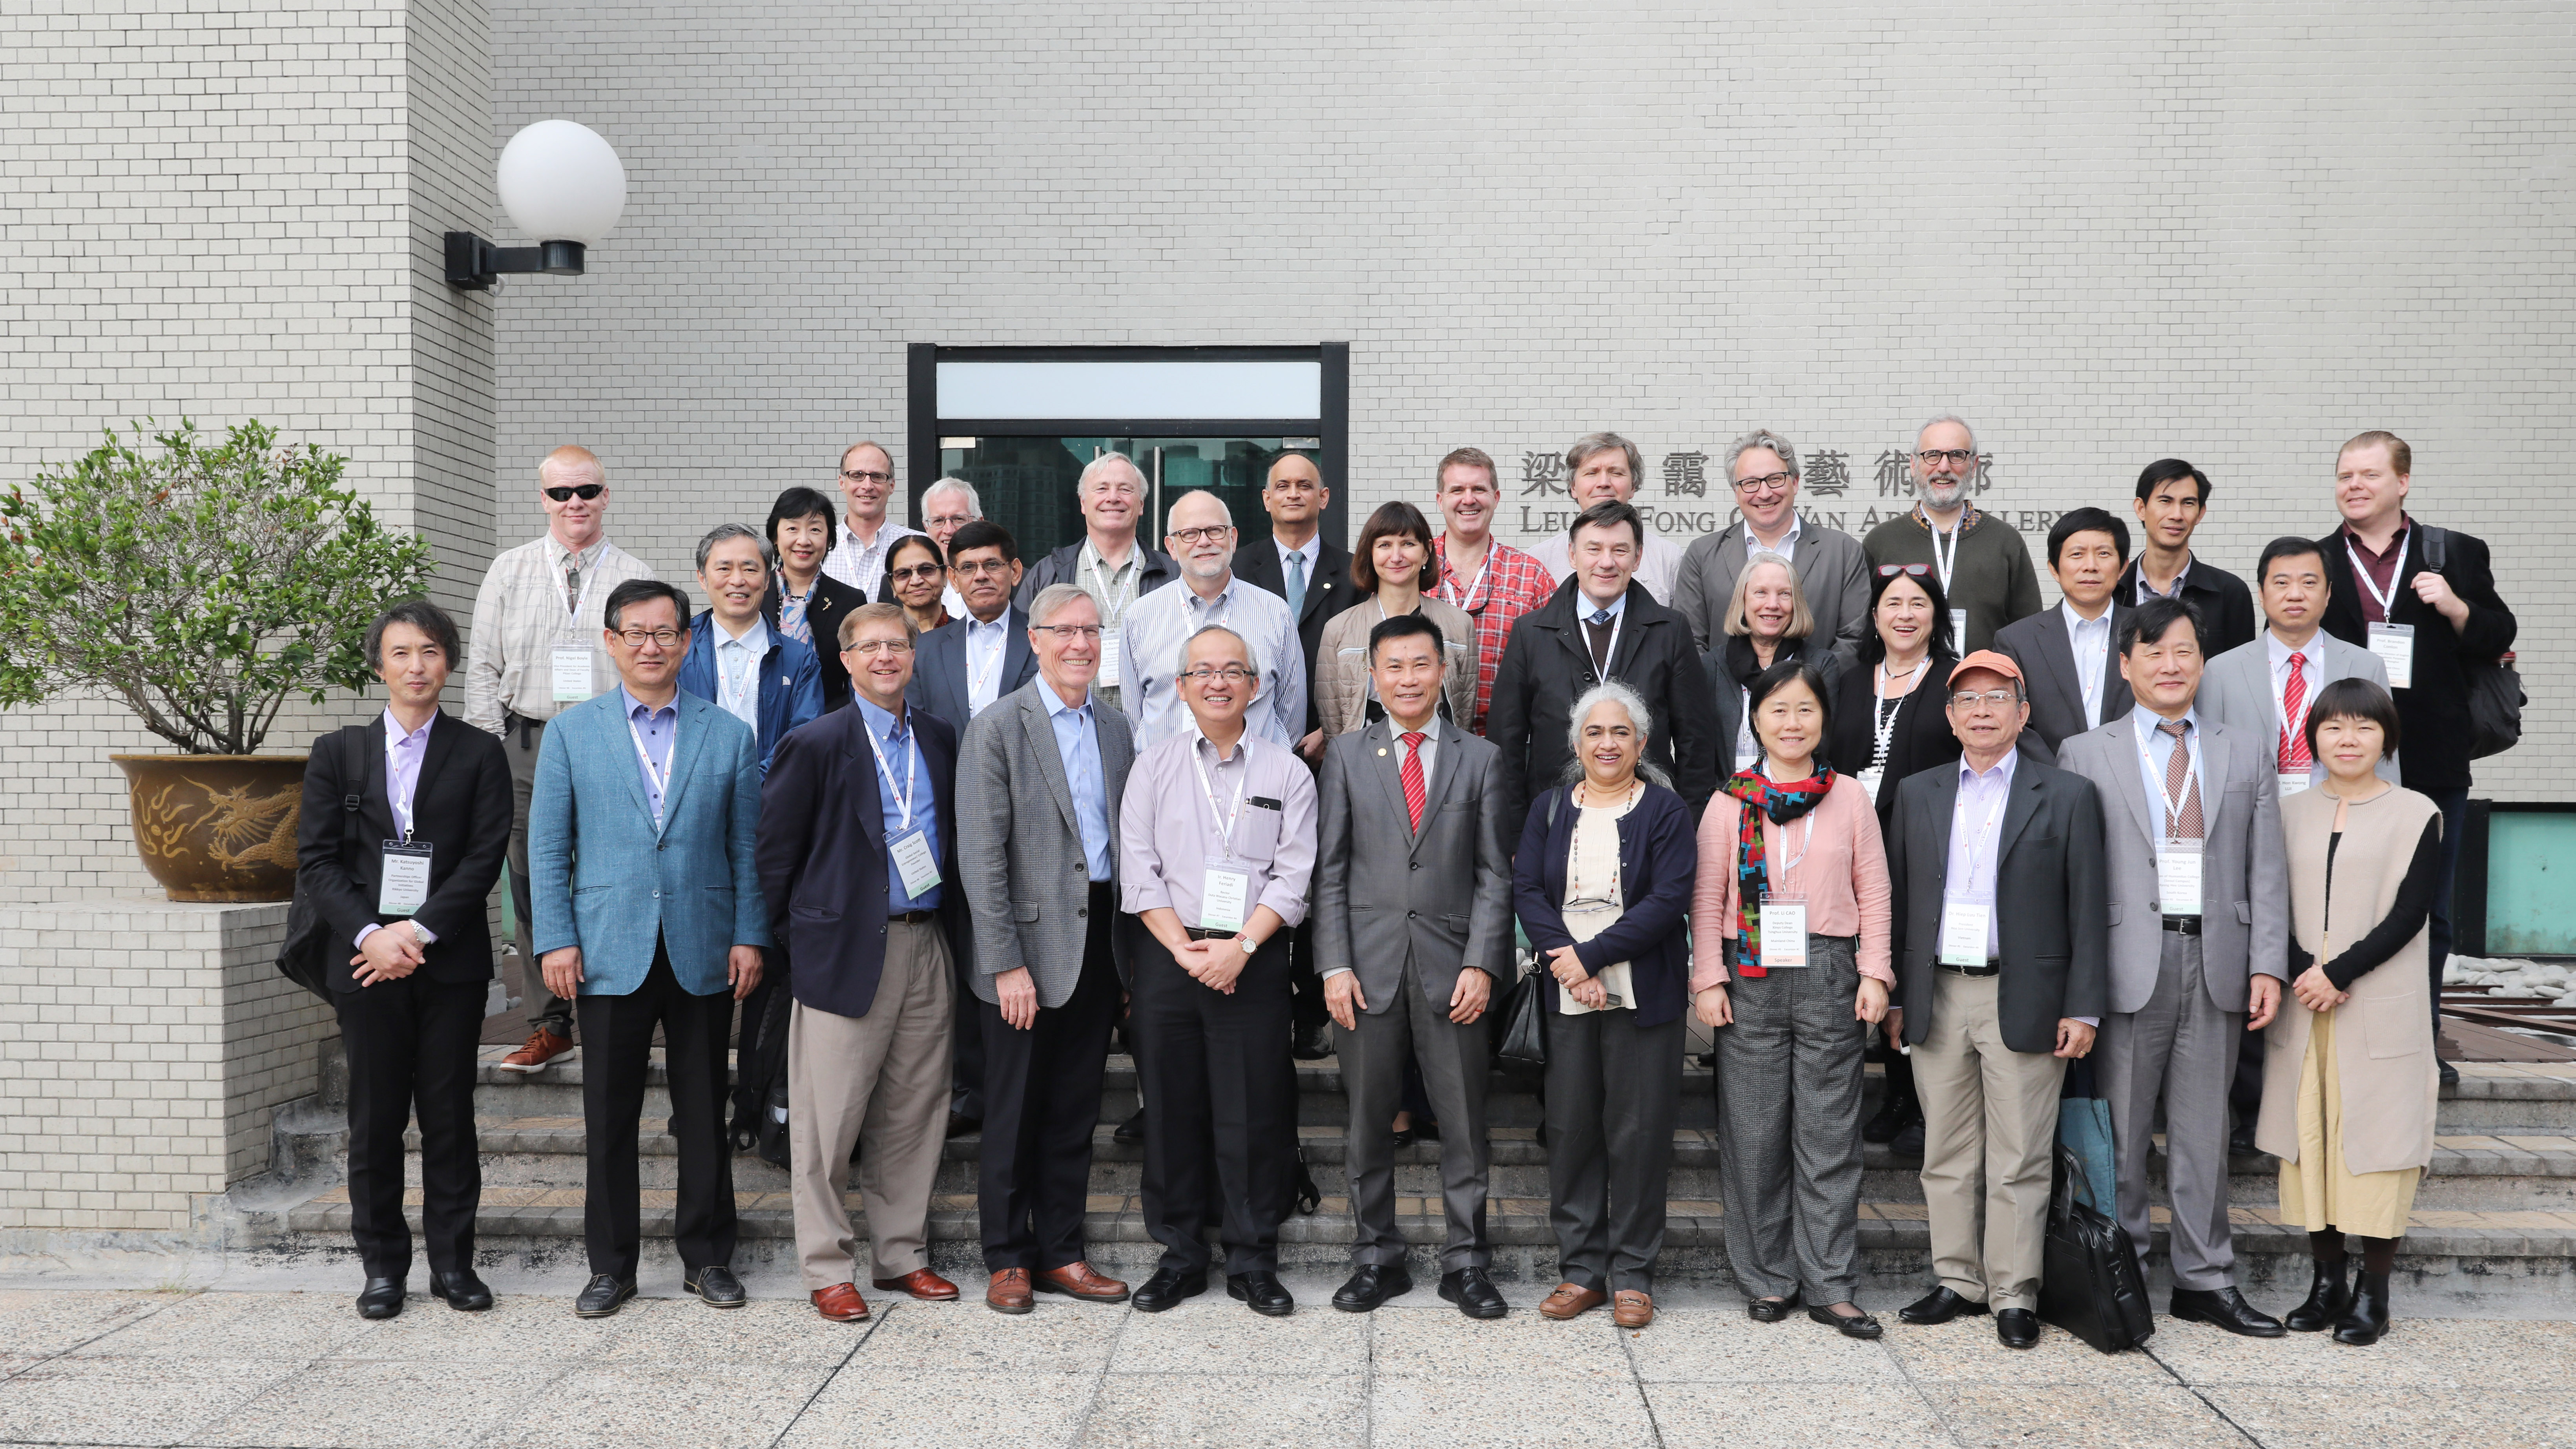 Group photo taken during the visit to Lingnan after the Launch Conference